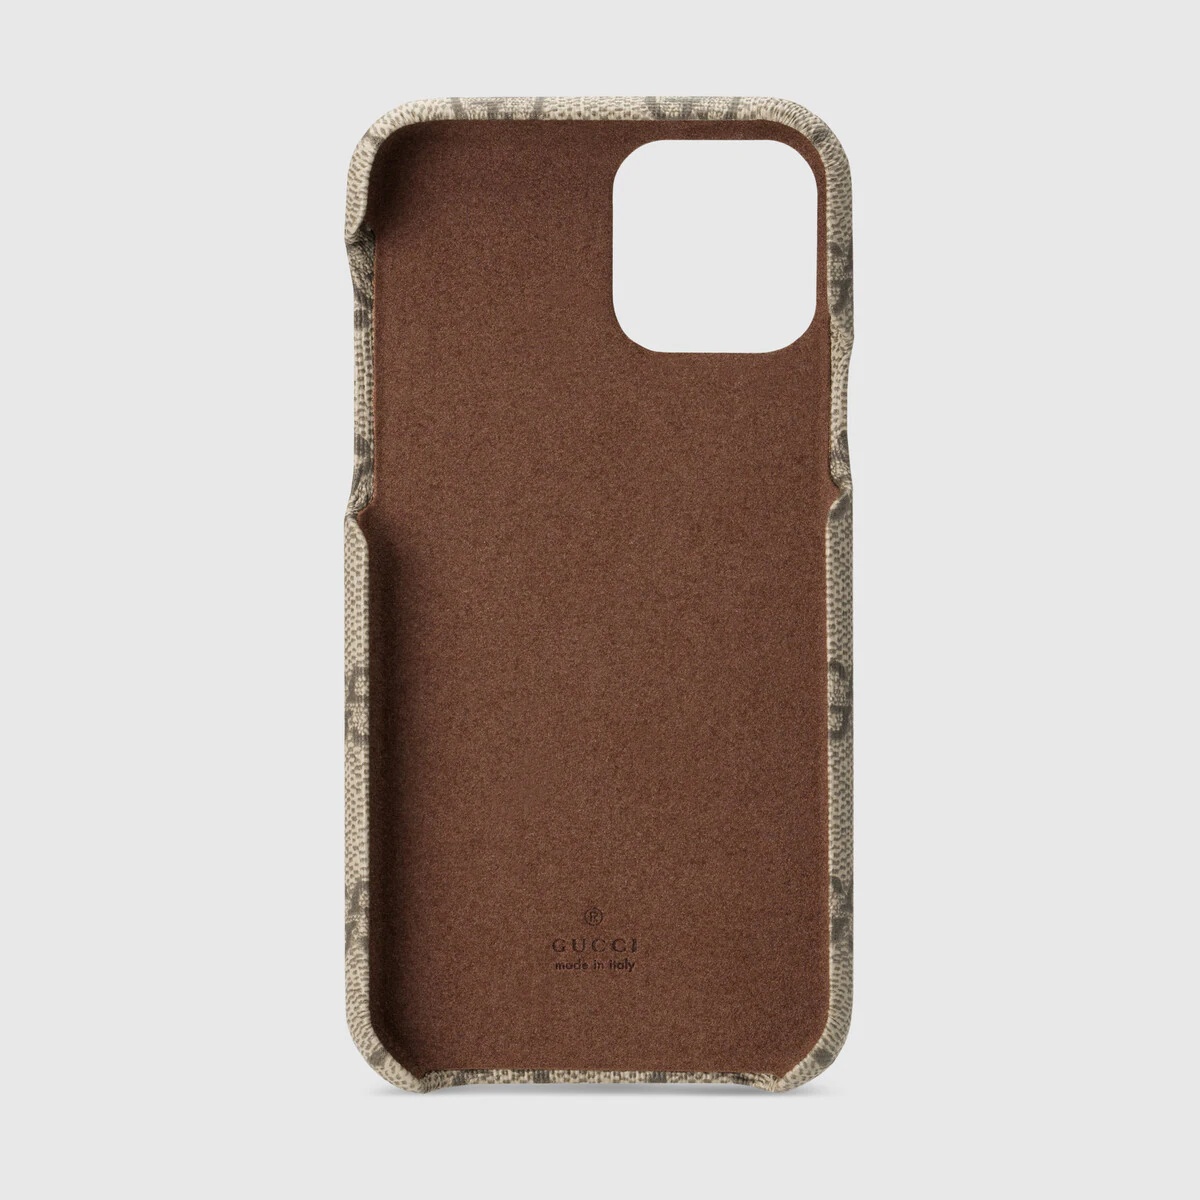 Ophidia GG case for iPhone 11 Pro - 2